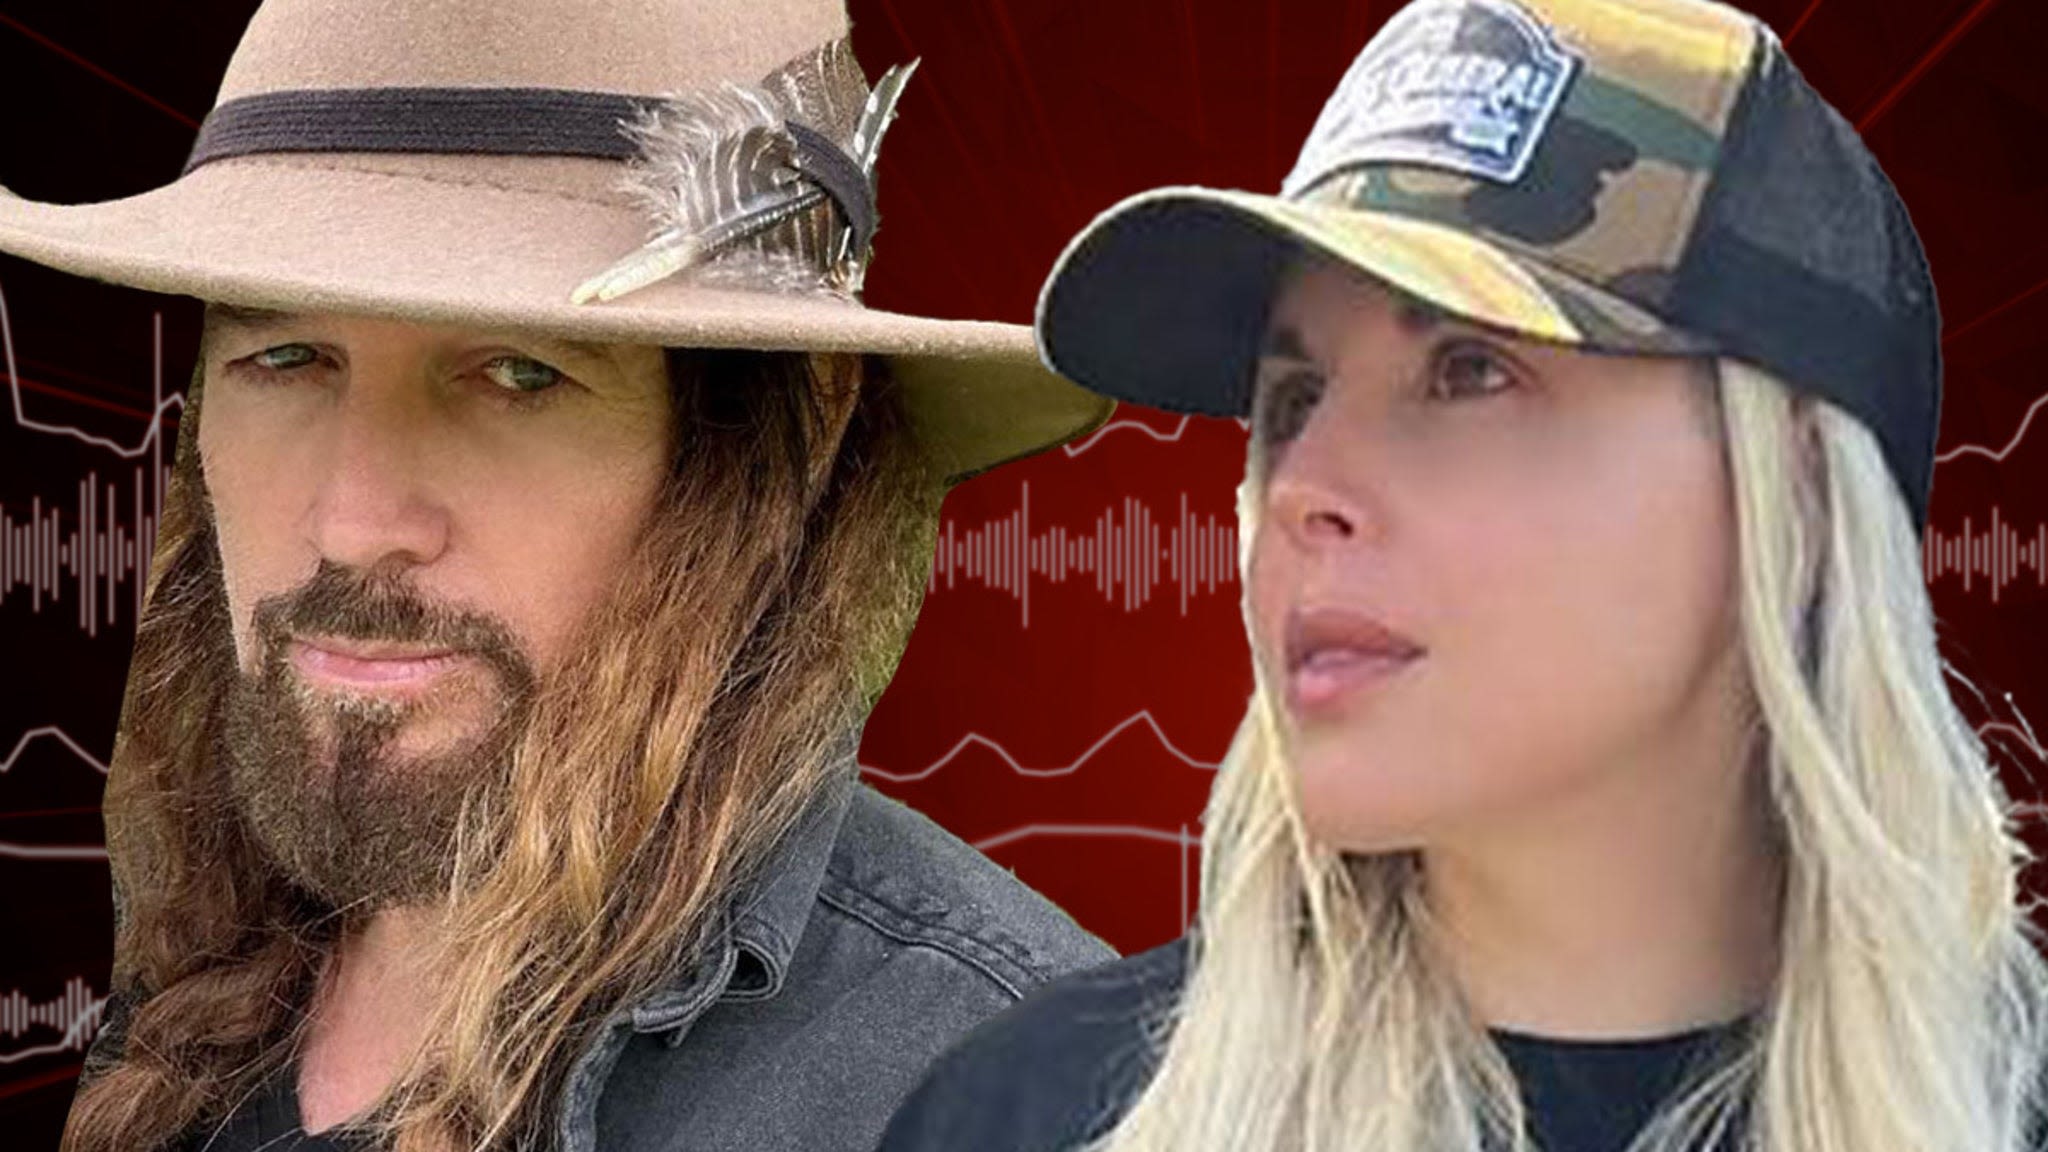 Billy Ray Cyrus Belittles Estranged Wife Firerose in Heated Confrontation